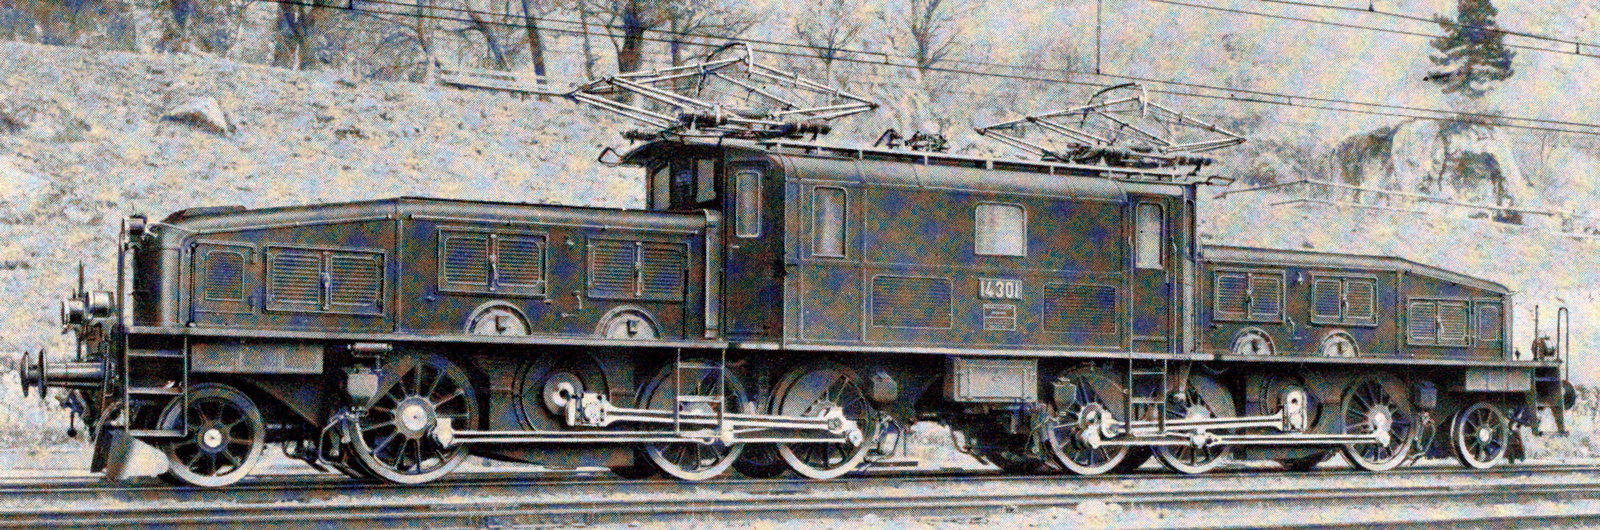 No. 14301 on the SLM type sheet